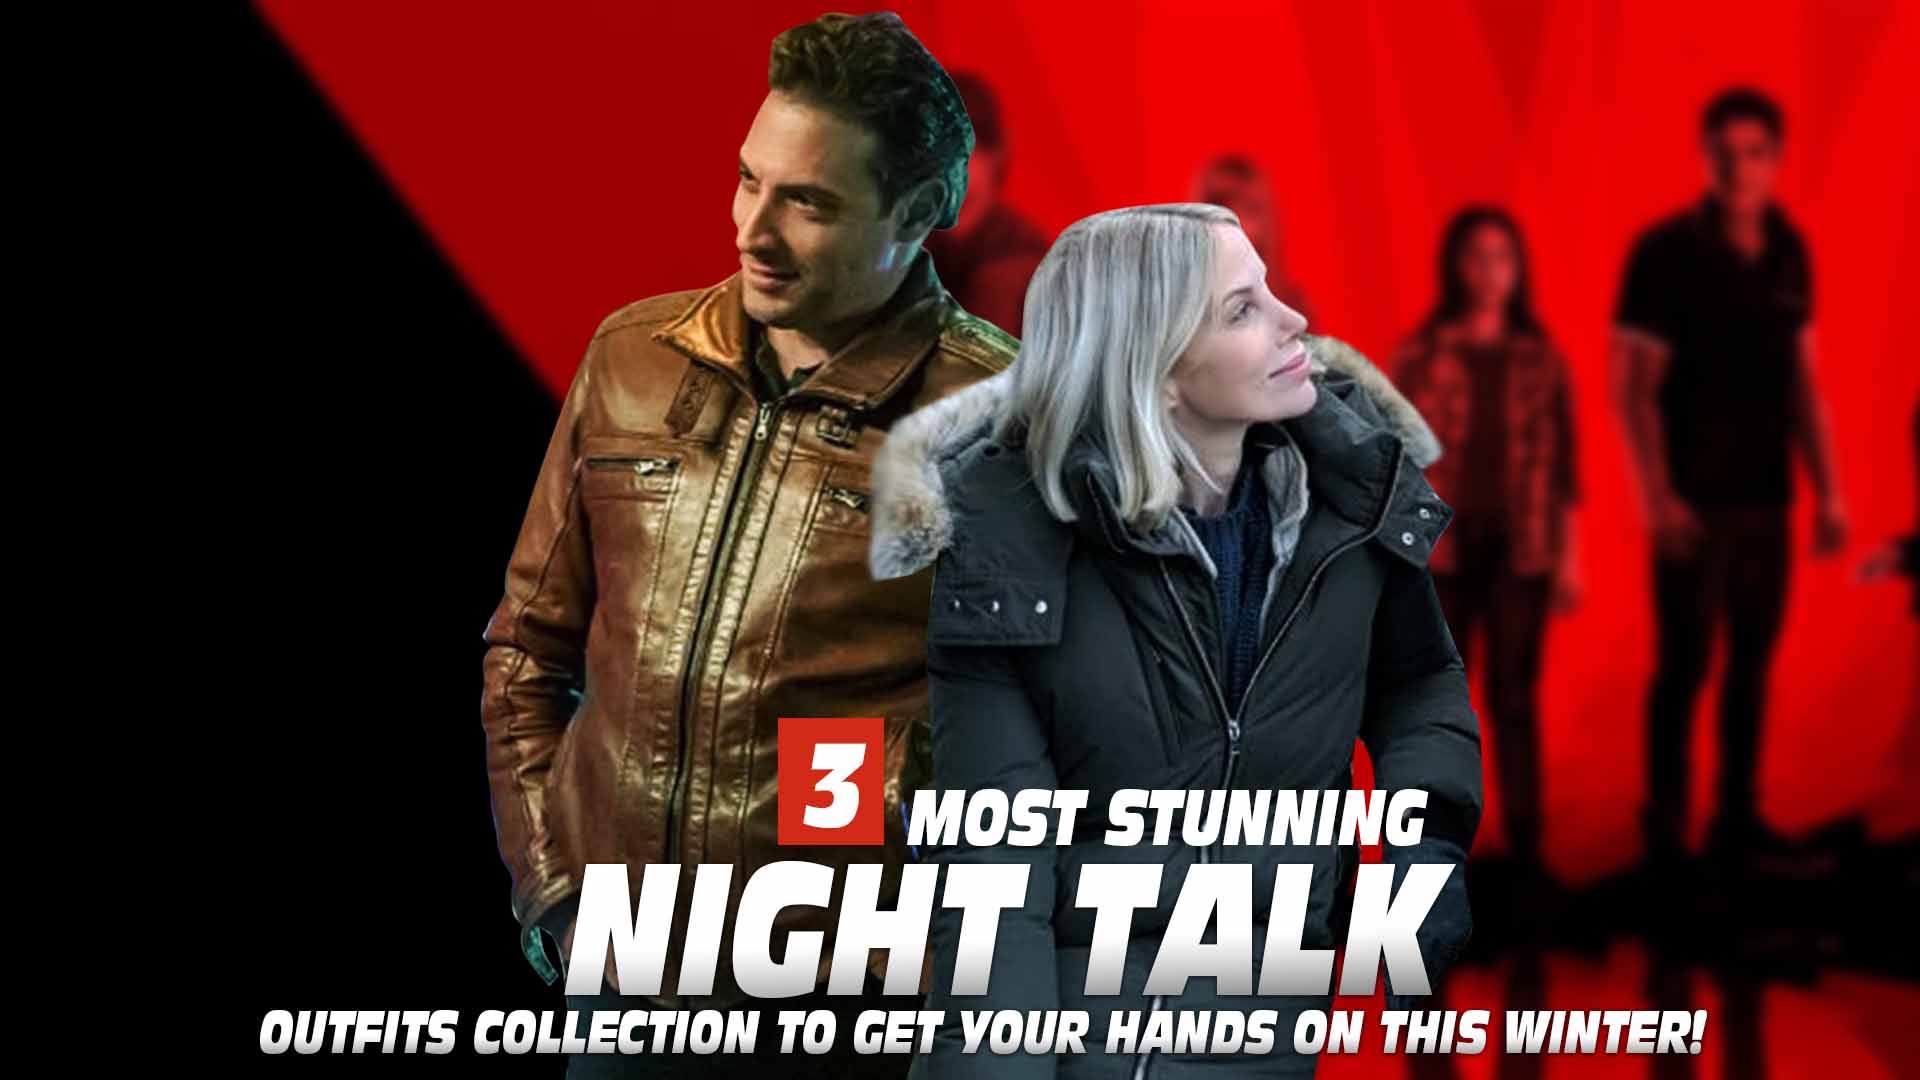 3 Most Stunning Nightalk Outfits Collection To Get Your Hands On This Winter!